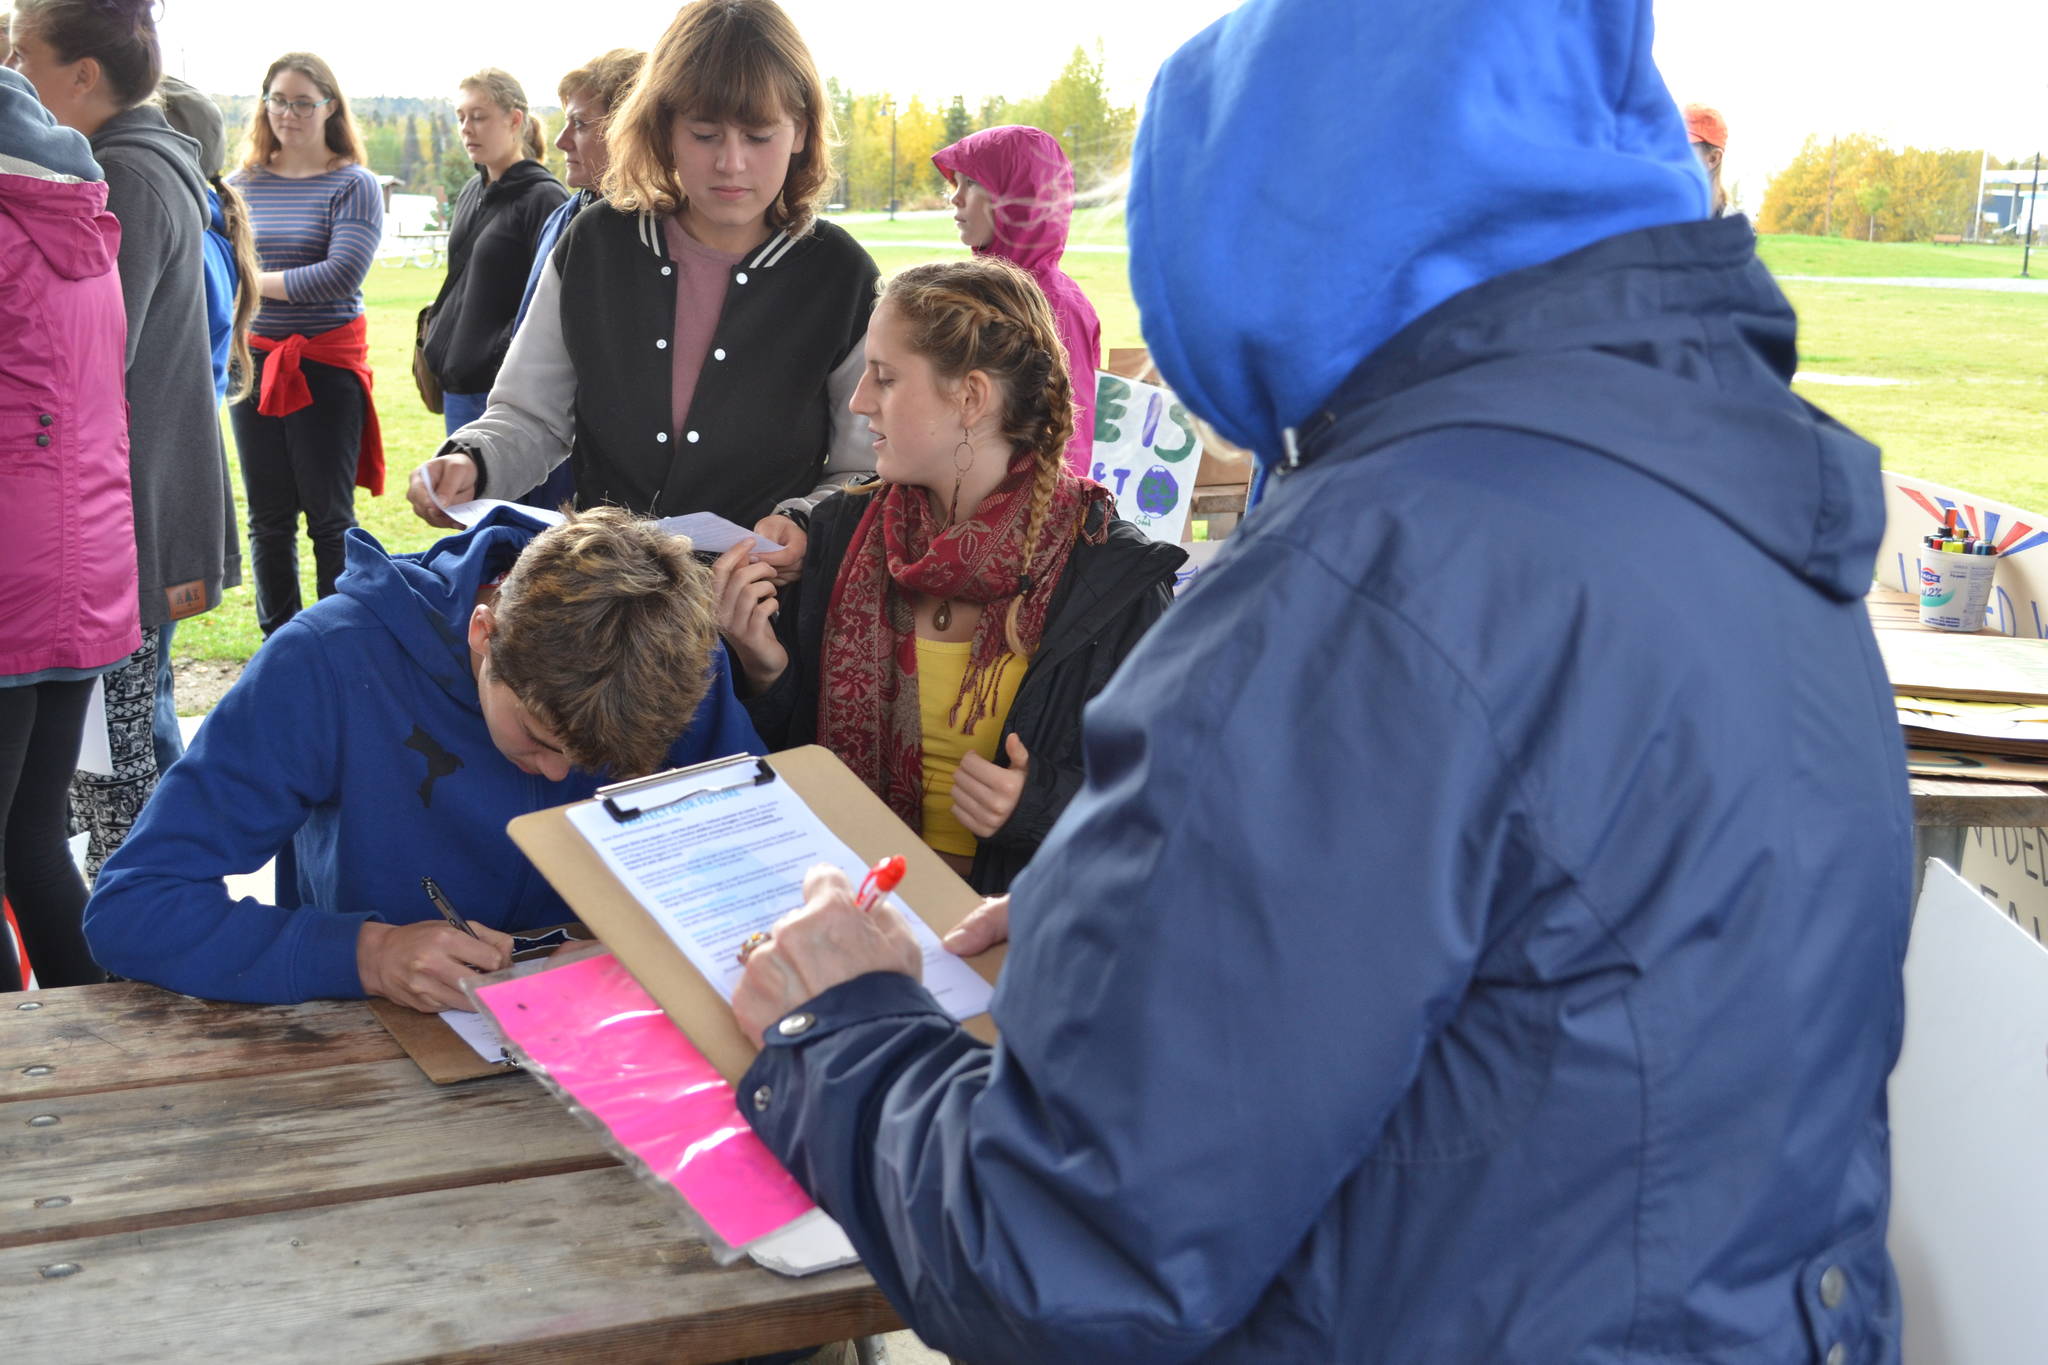 Climate Strike participants sign a petition asking the Kenai Peninsula Borough to incorporate climate change into the borough’s comprehensive plan during Soldotna’s Climate Strike on Sept. 20, 2019. (Photo by Brian Mazurek/Peninsula Clarion)